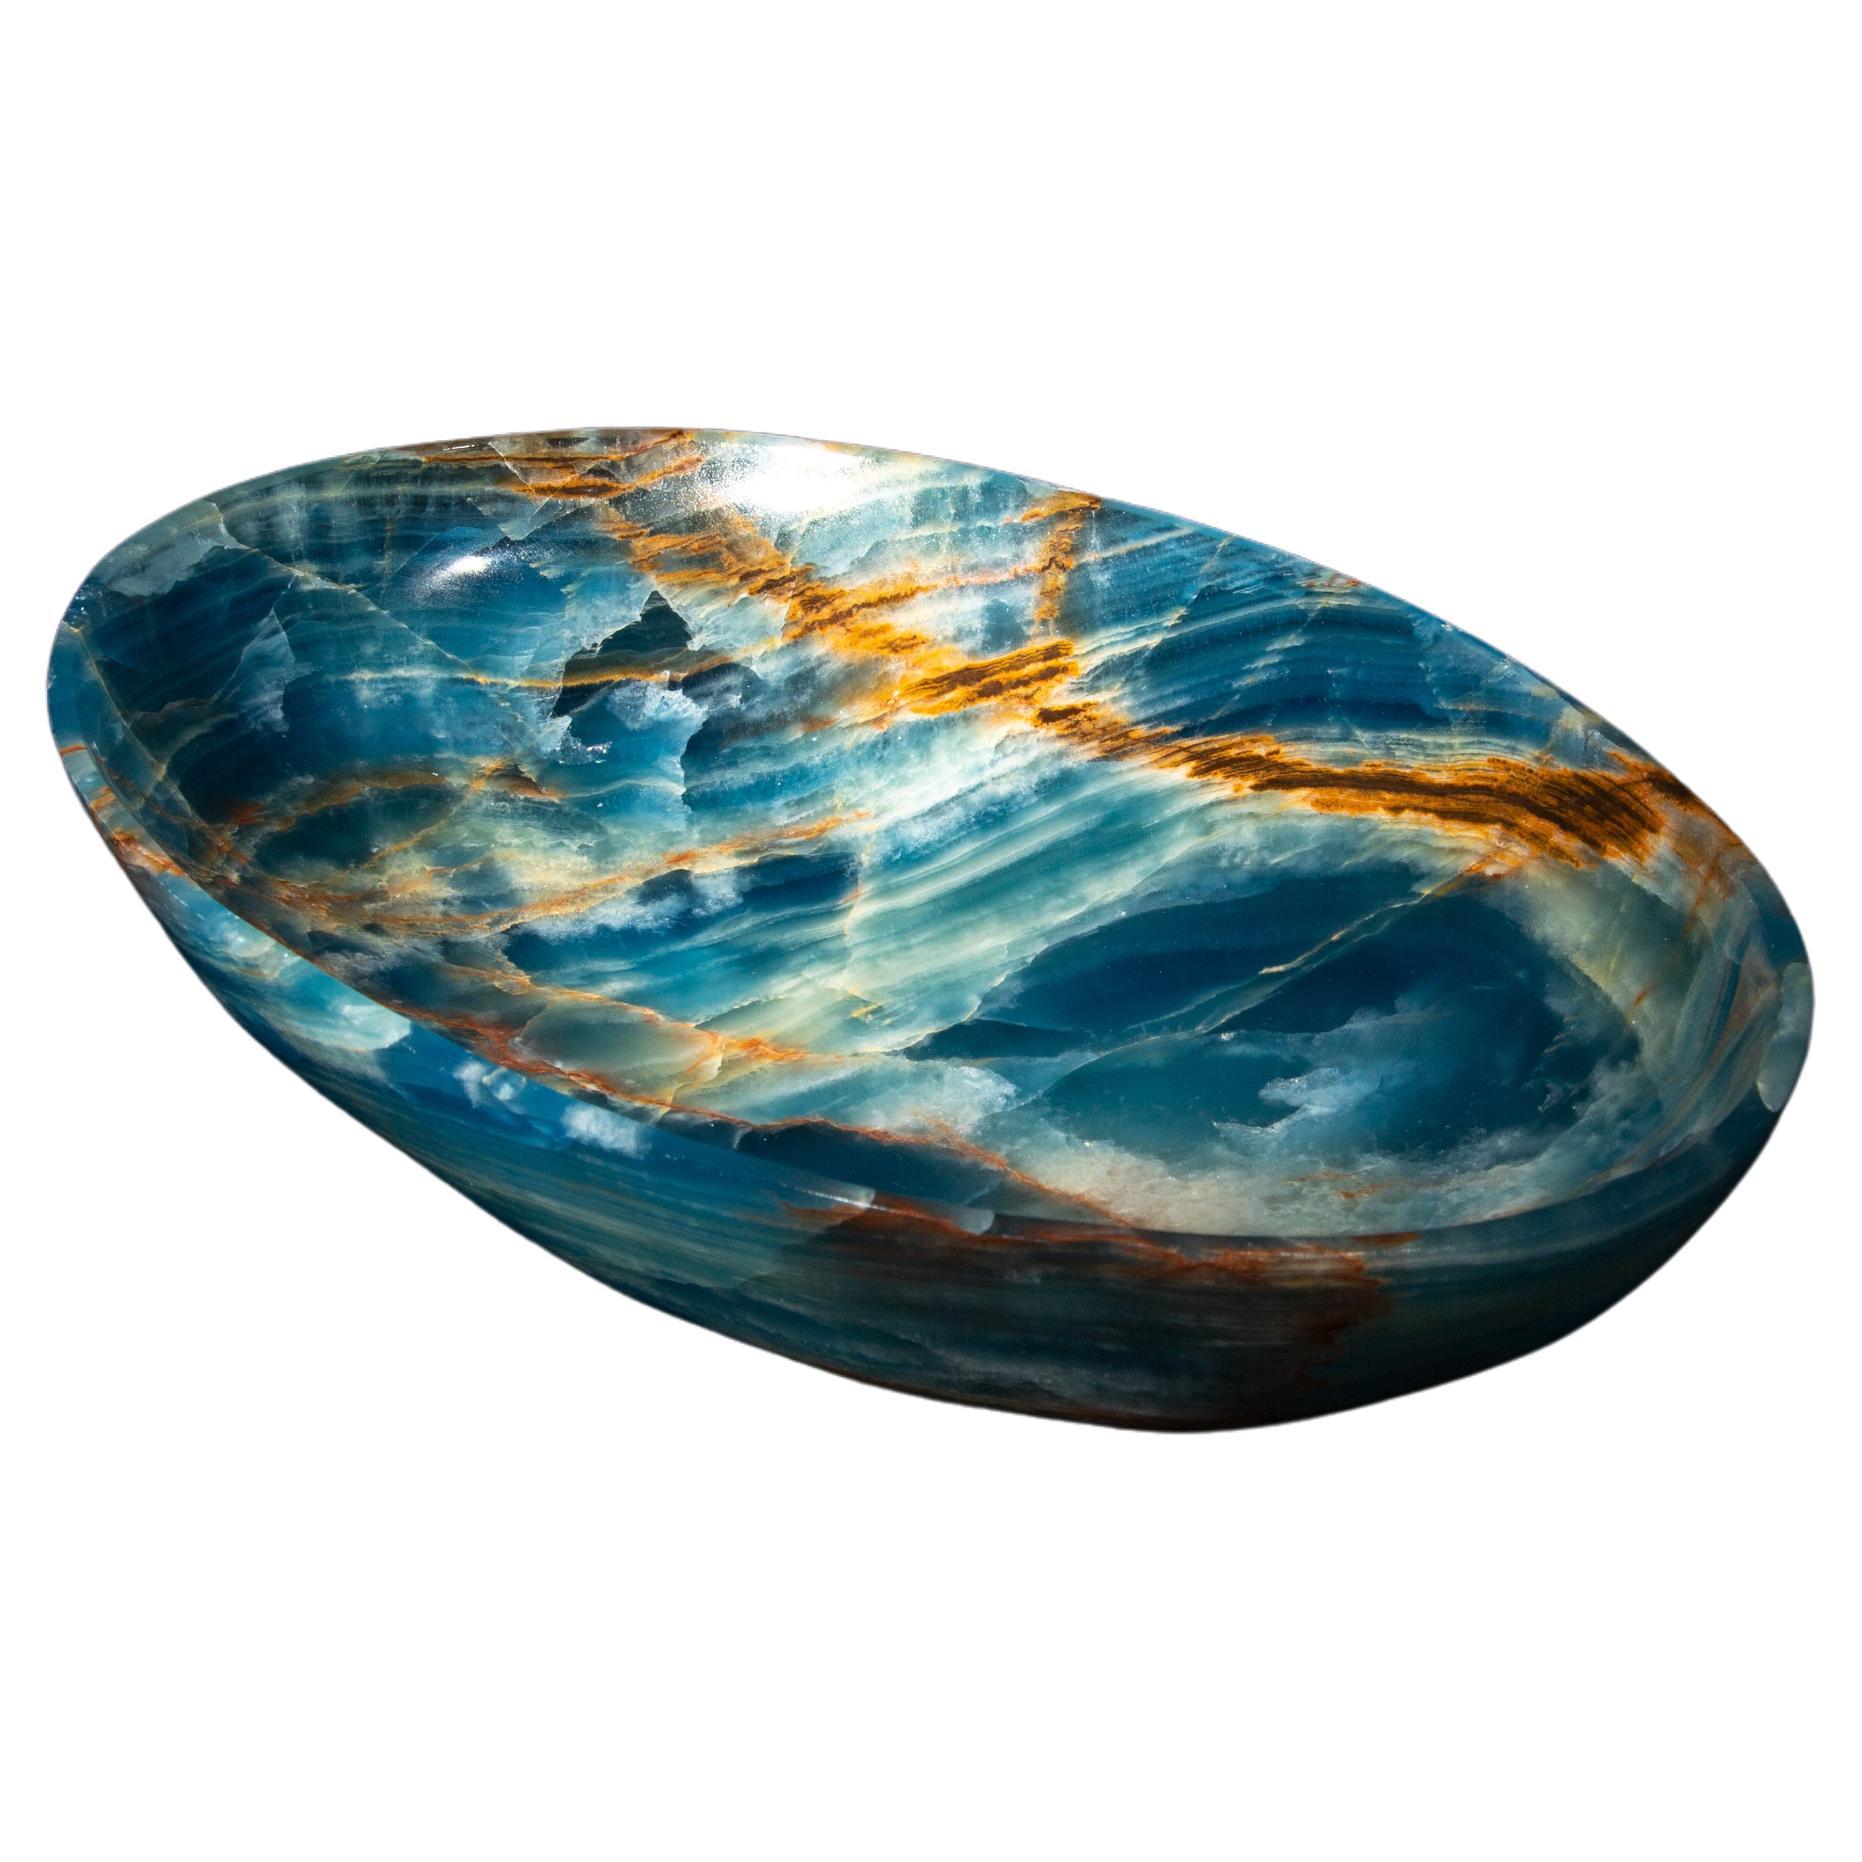 Blue Onyx Vide Poche, 9.25" For Sale